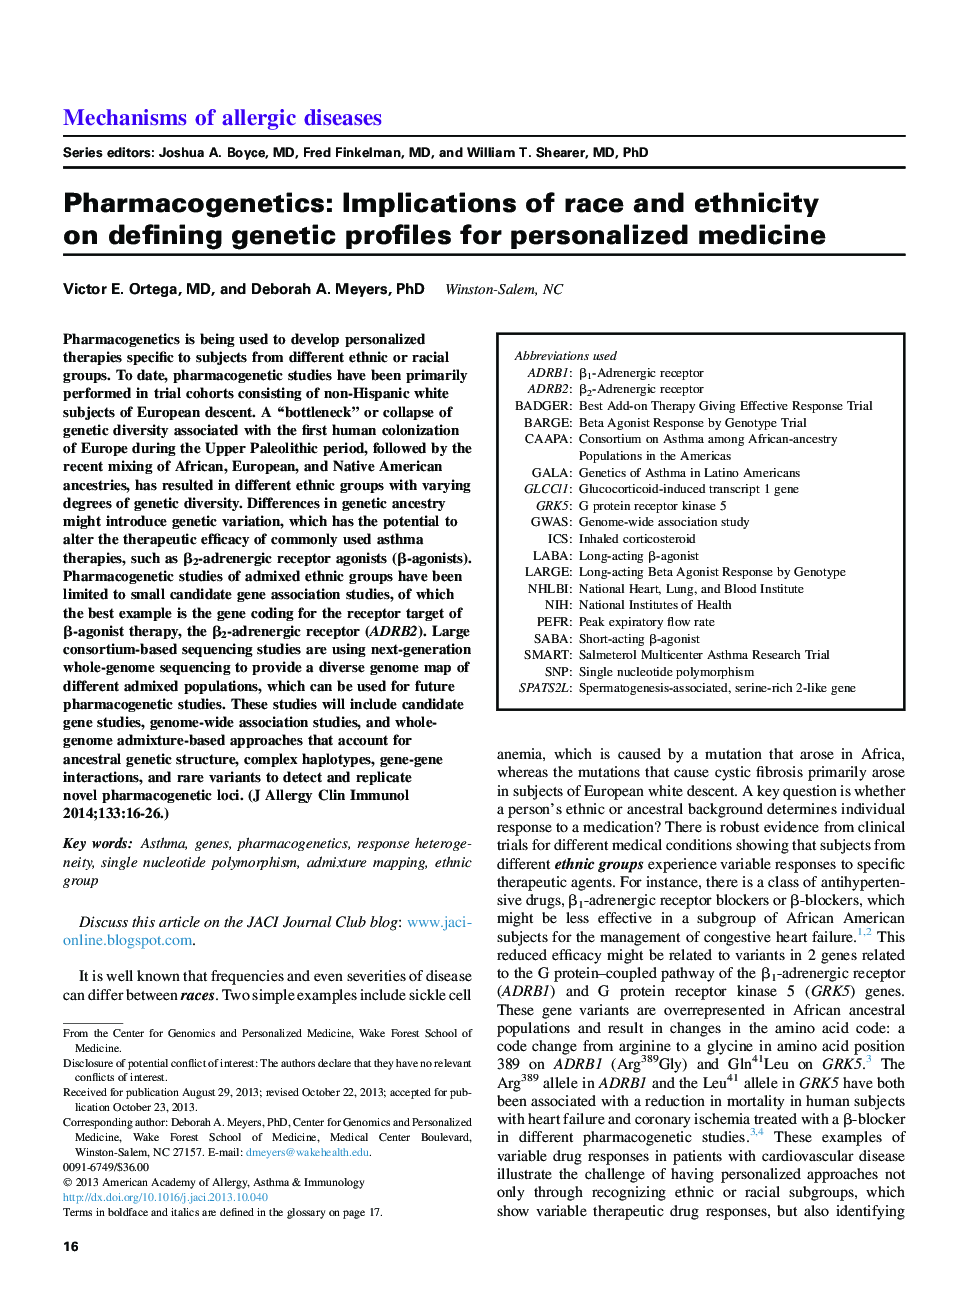 Pharmacogenetics: Implications of race and ethnicity onÂ defining genetic profiles for personalized medicine